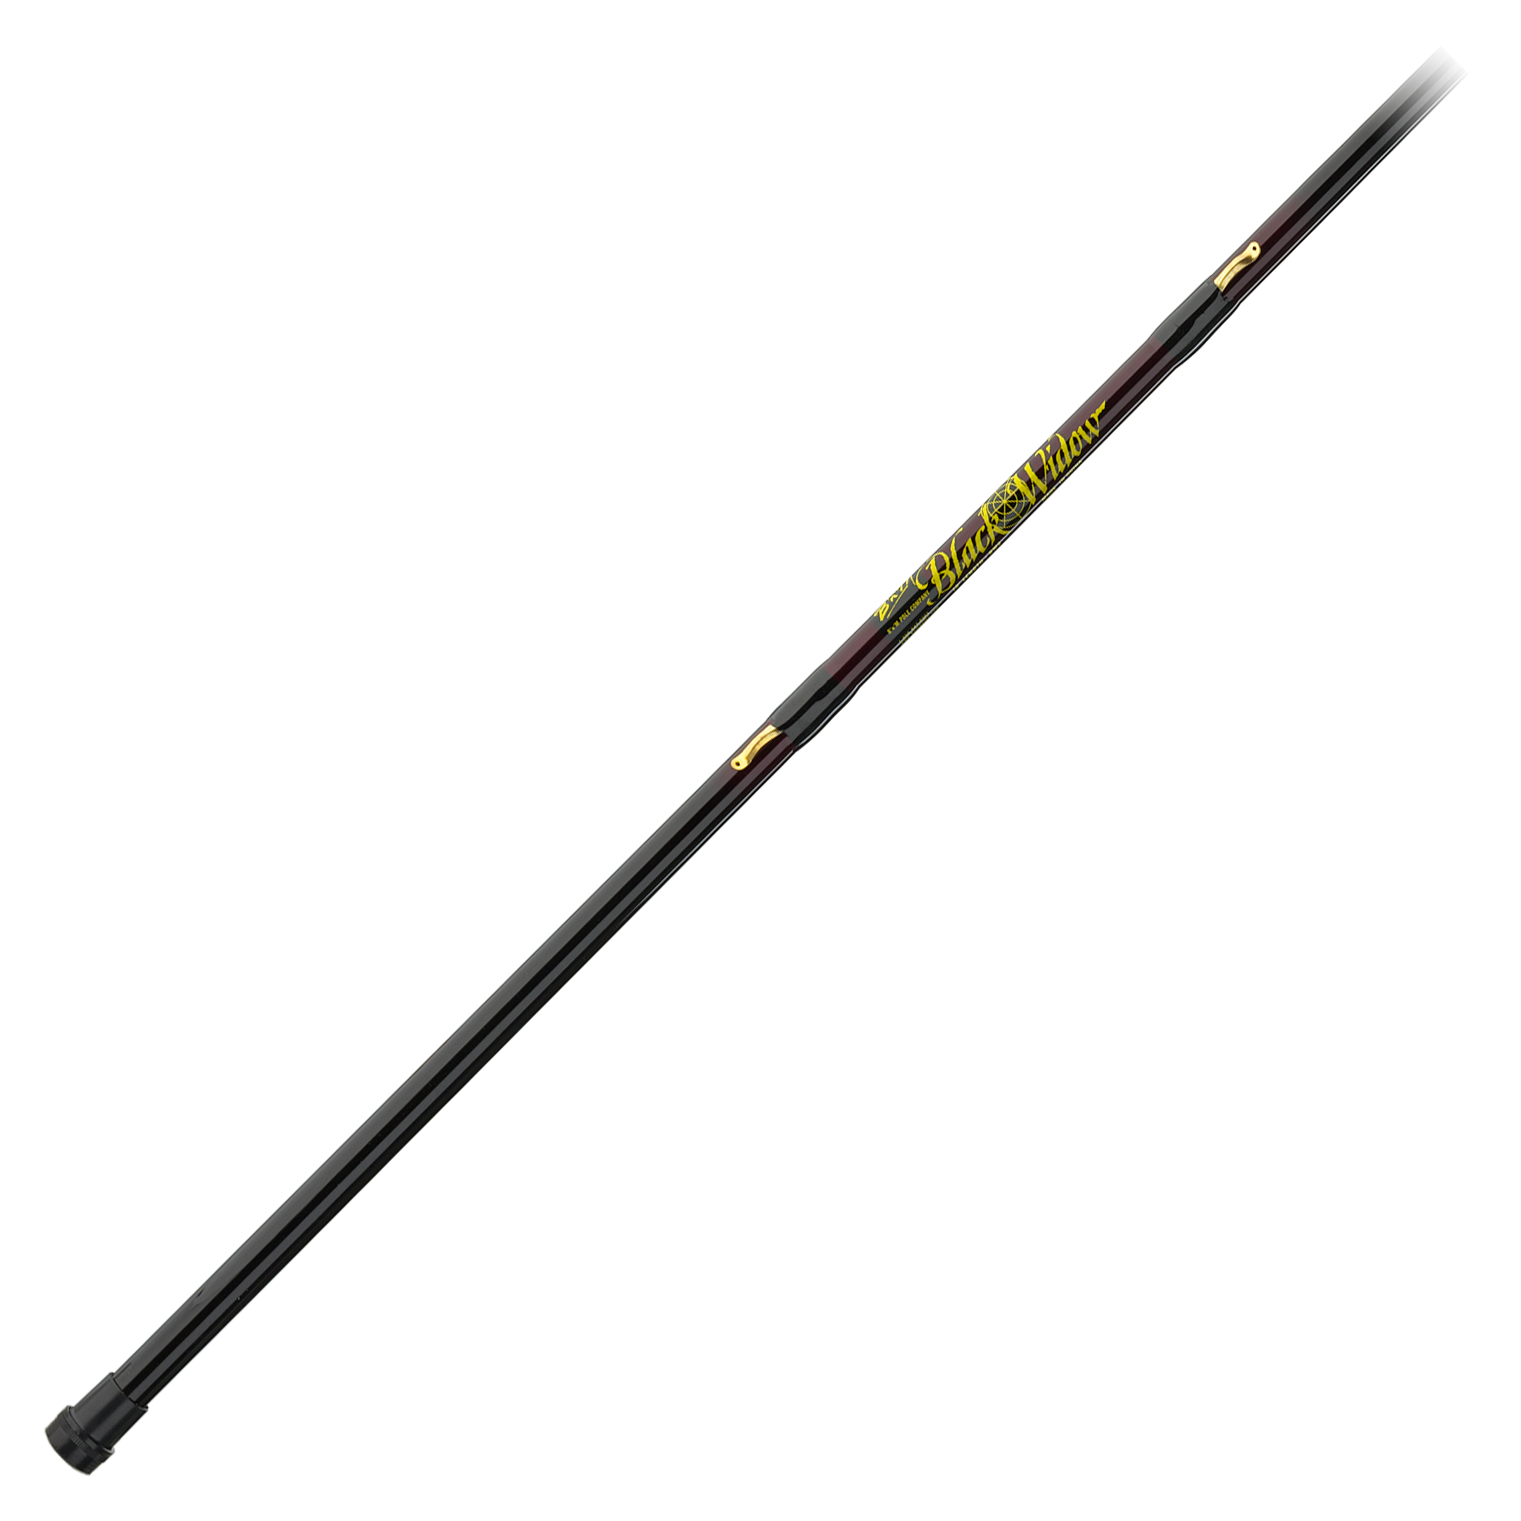 Gator Crappie Extendable Fishing Pole #1 13ft Extension